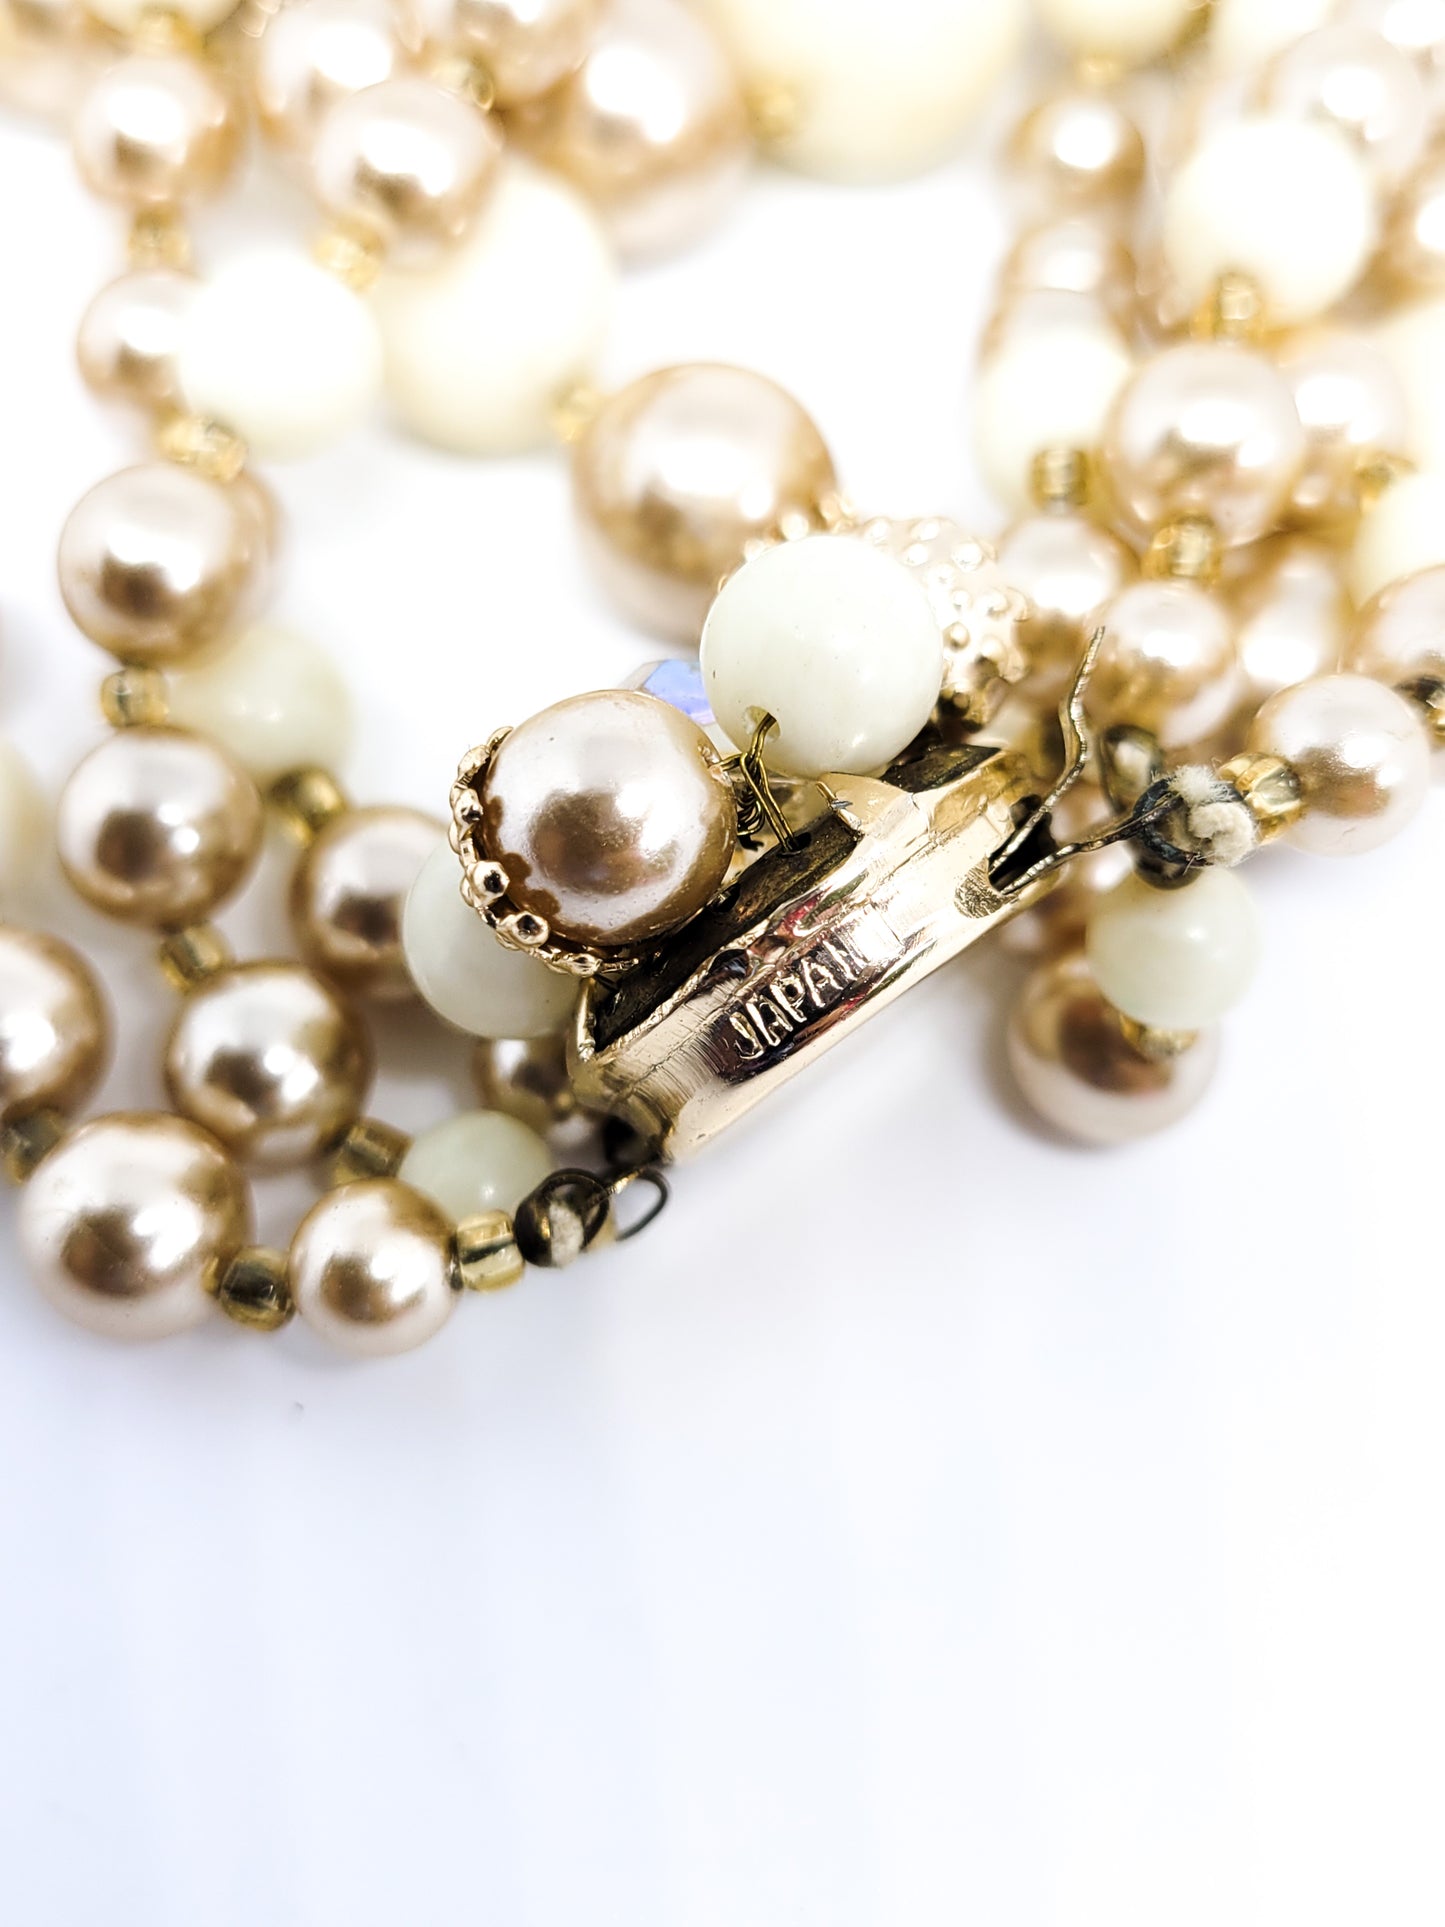 Shades of cream pearl Lucite Austrian crystal triple strand vintage necklace